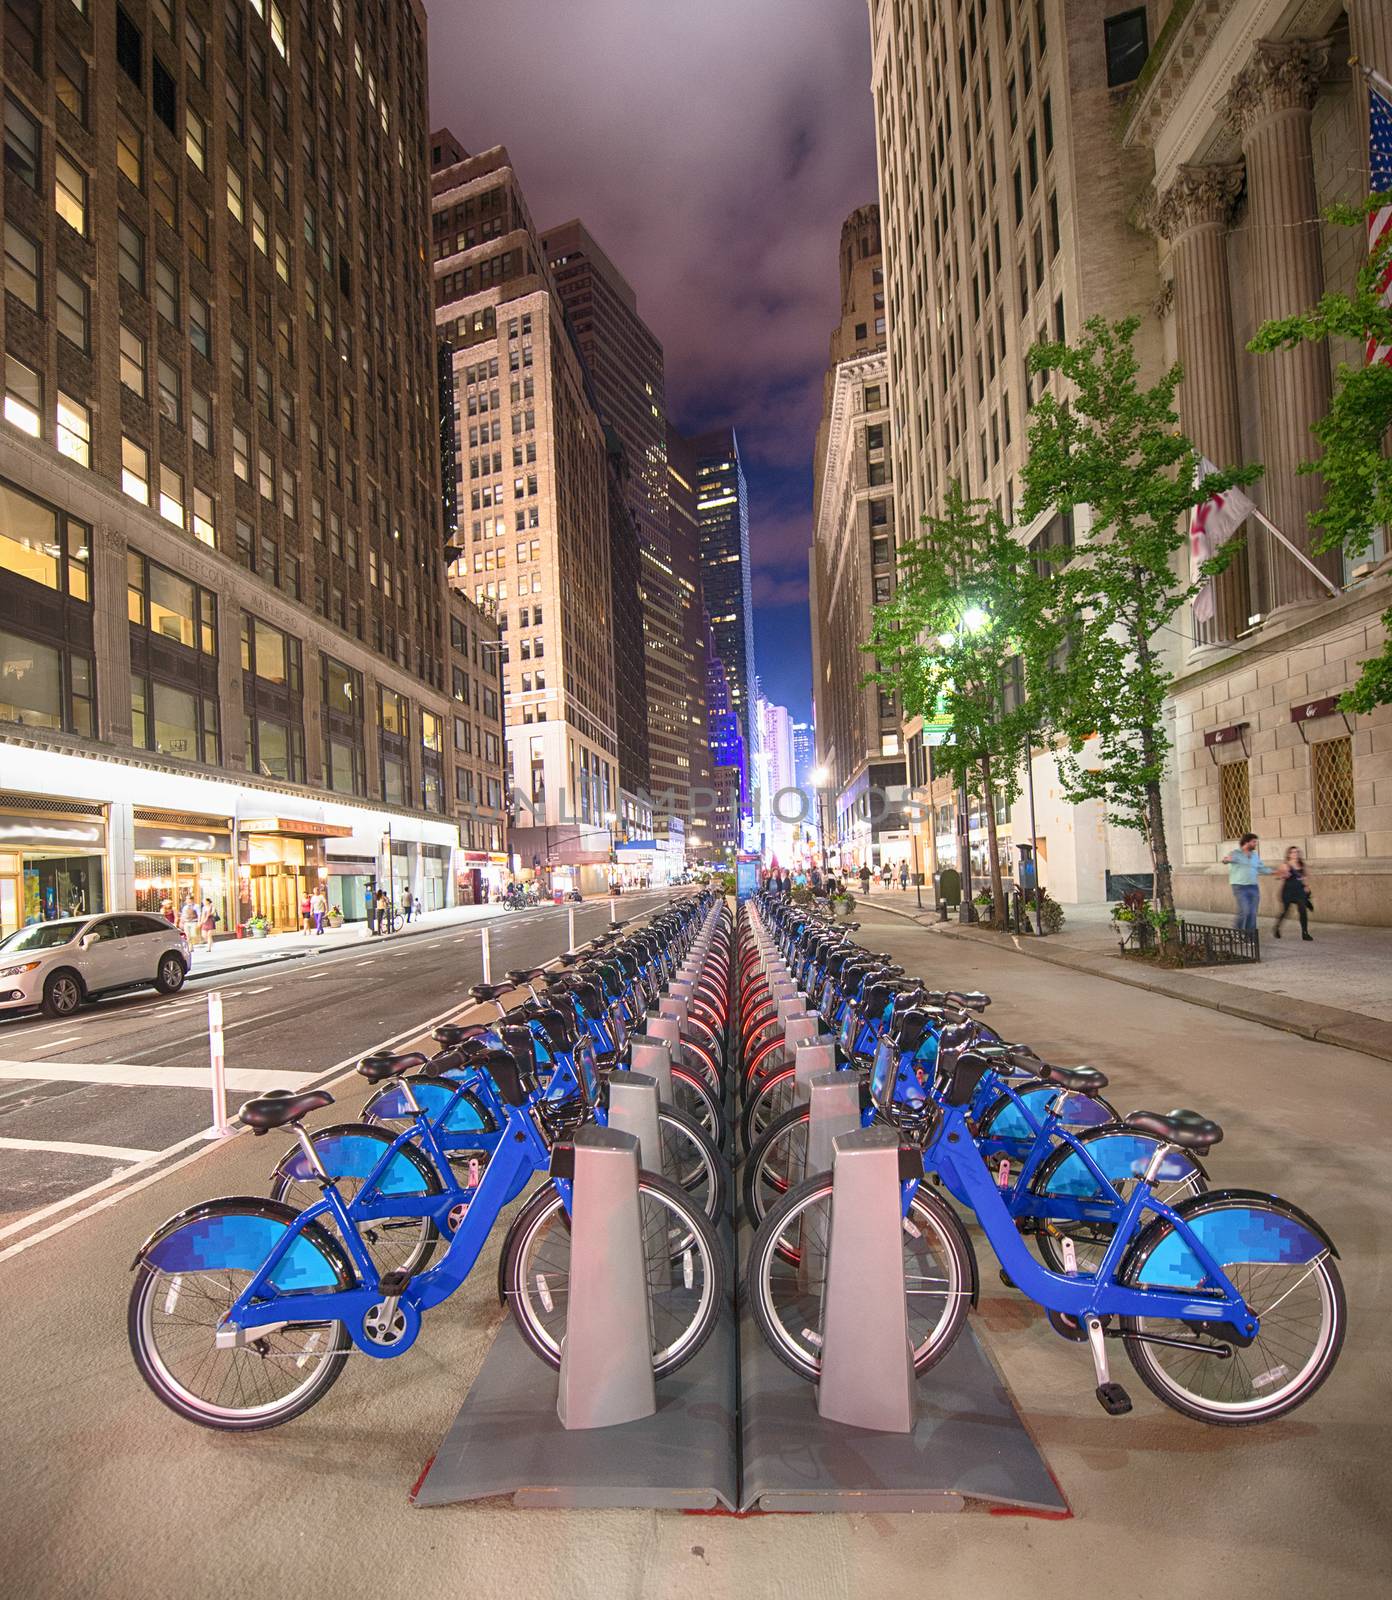 A row of blue bicycles on New York street at night.